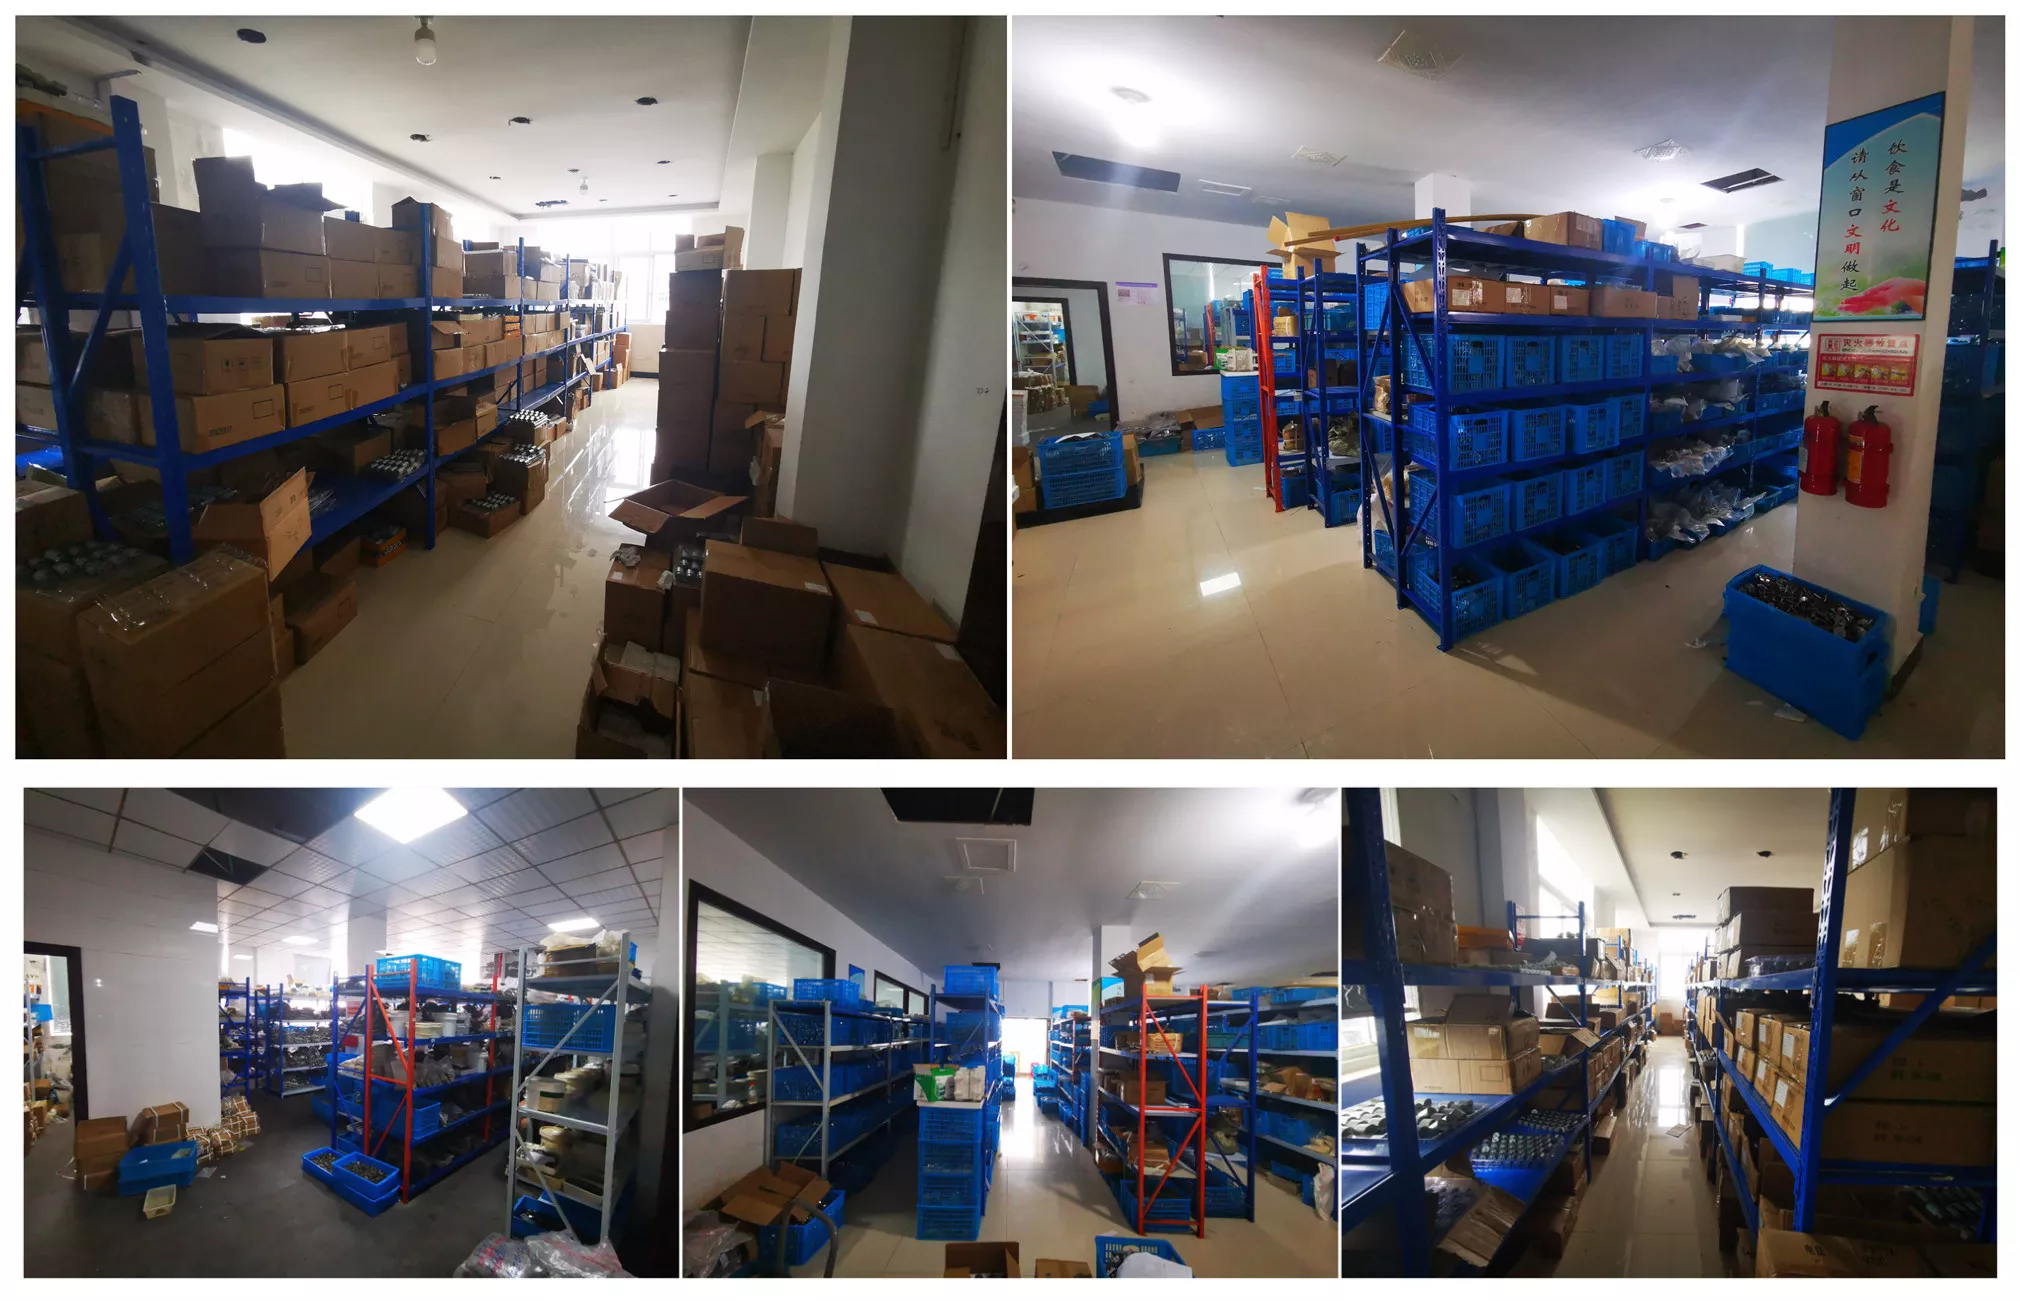 Small dc electric motor storage warehouse.webp